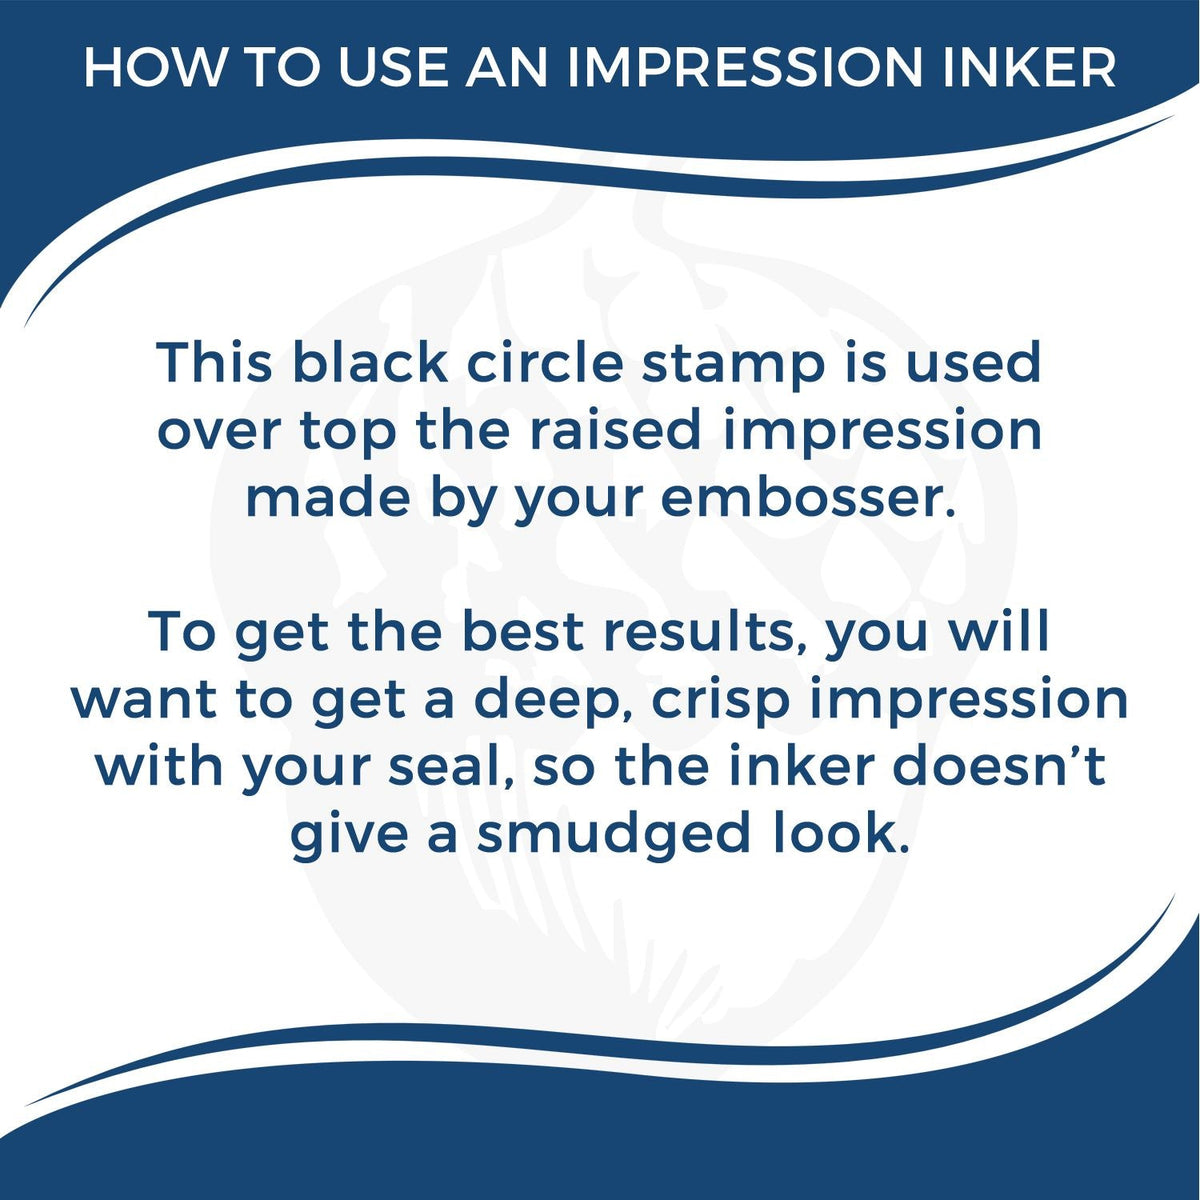 Impression Inker How To Use